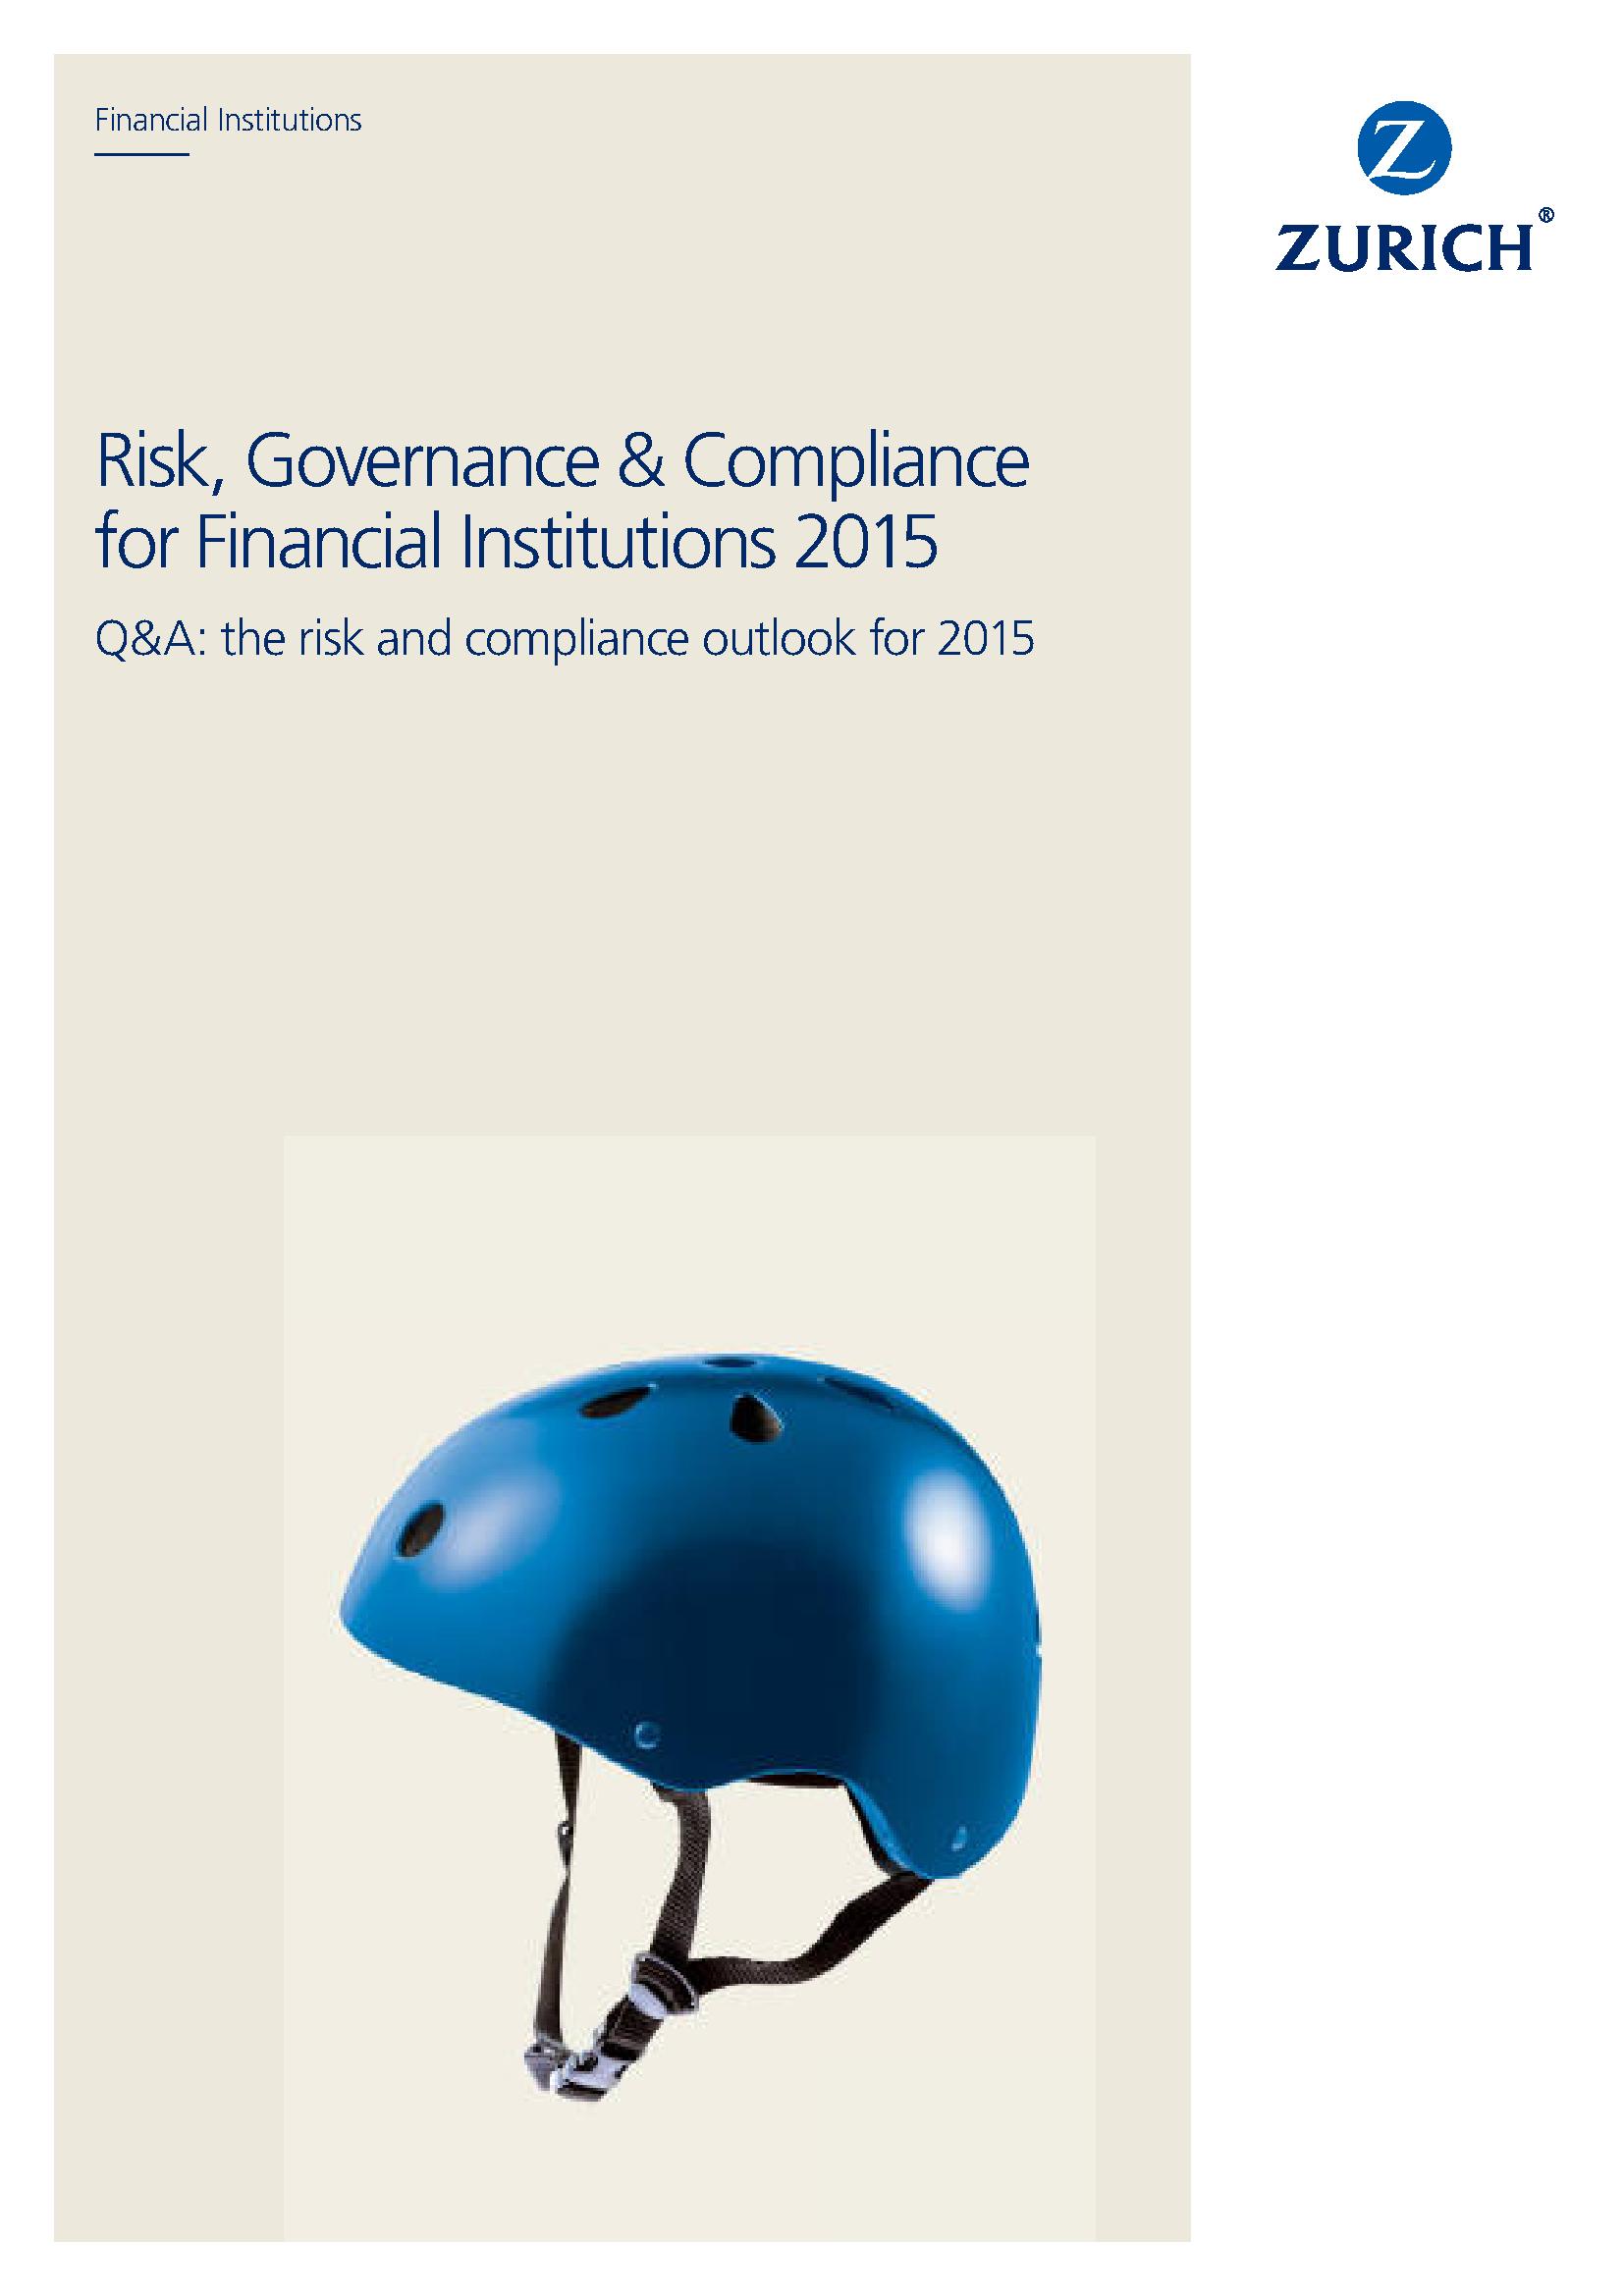 Q&A: the risk and compliance outlook for 2015